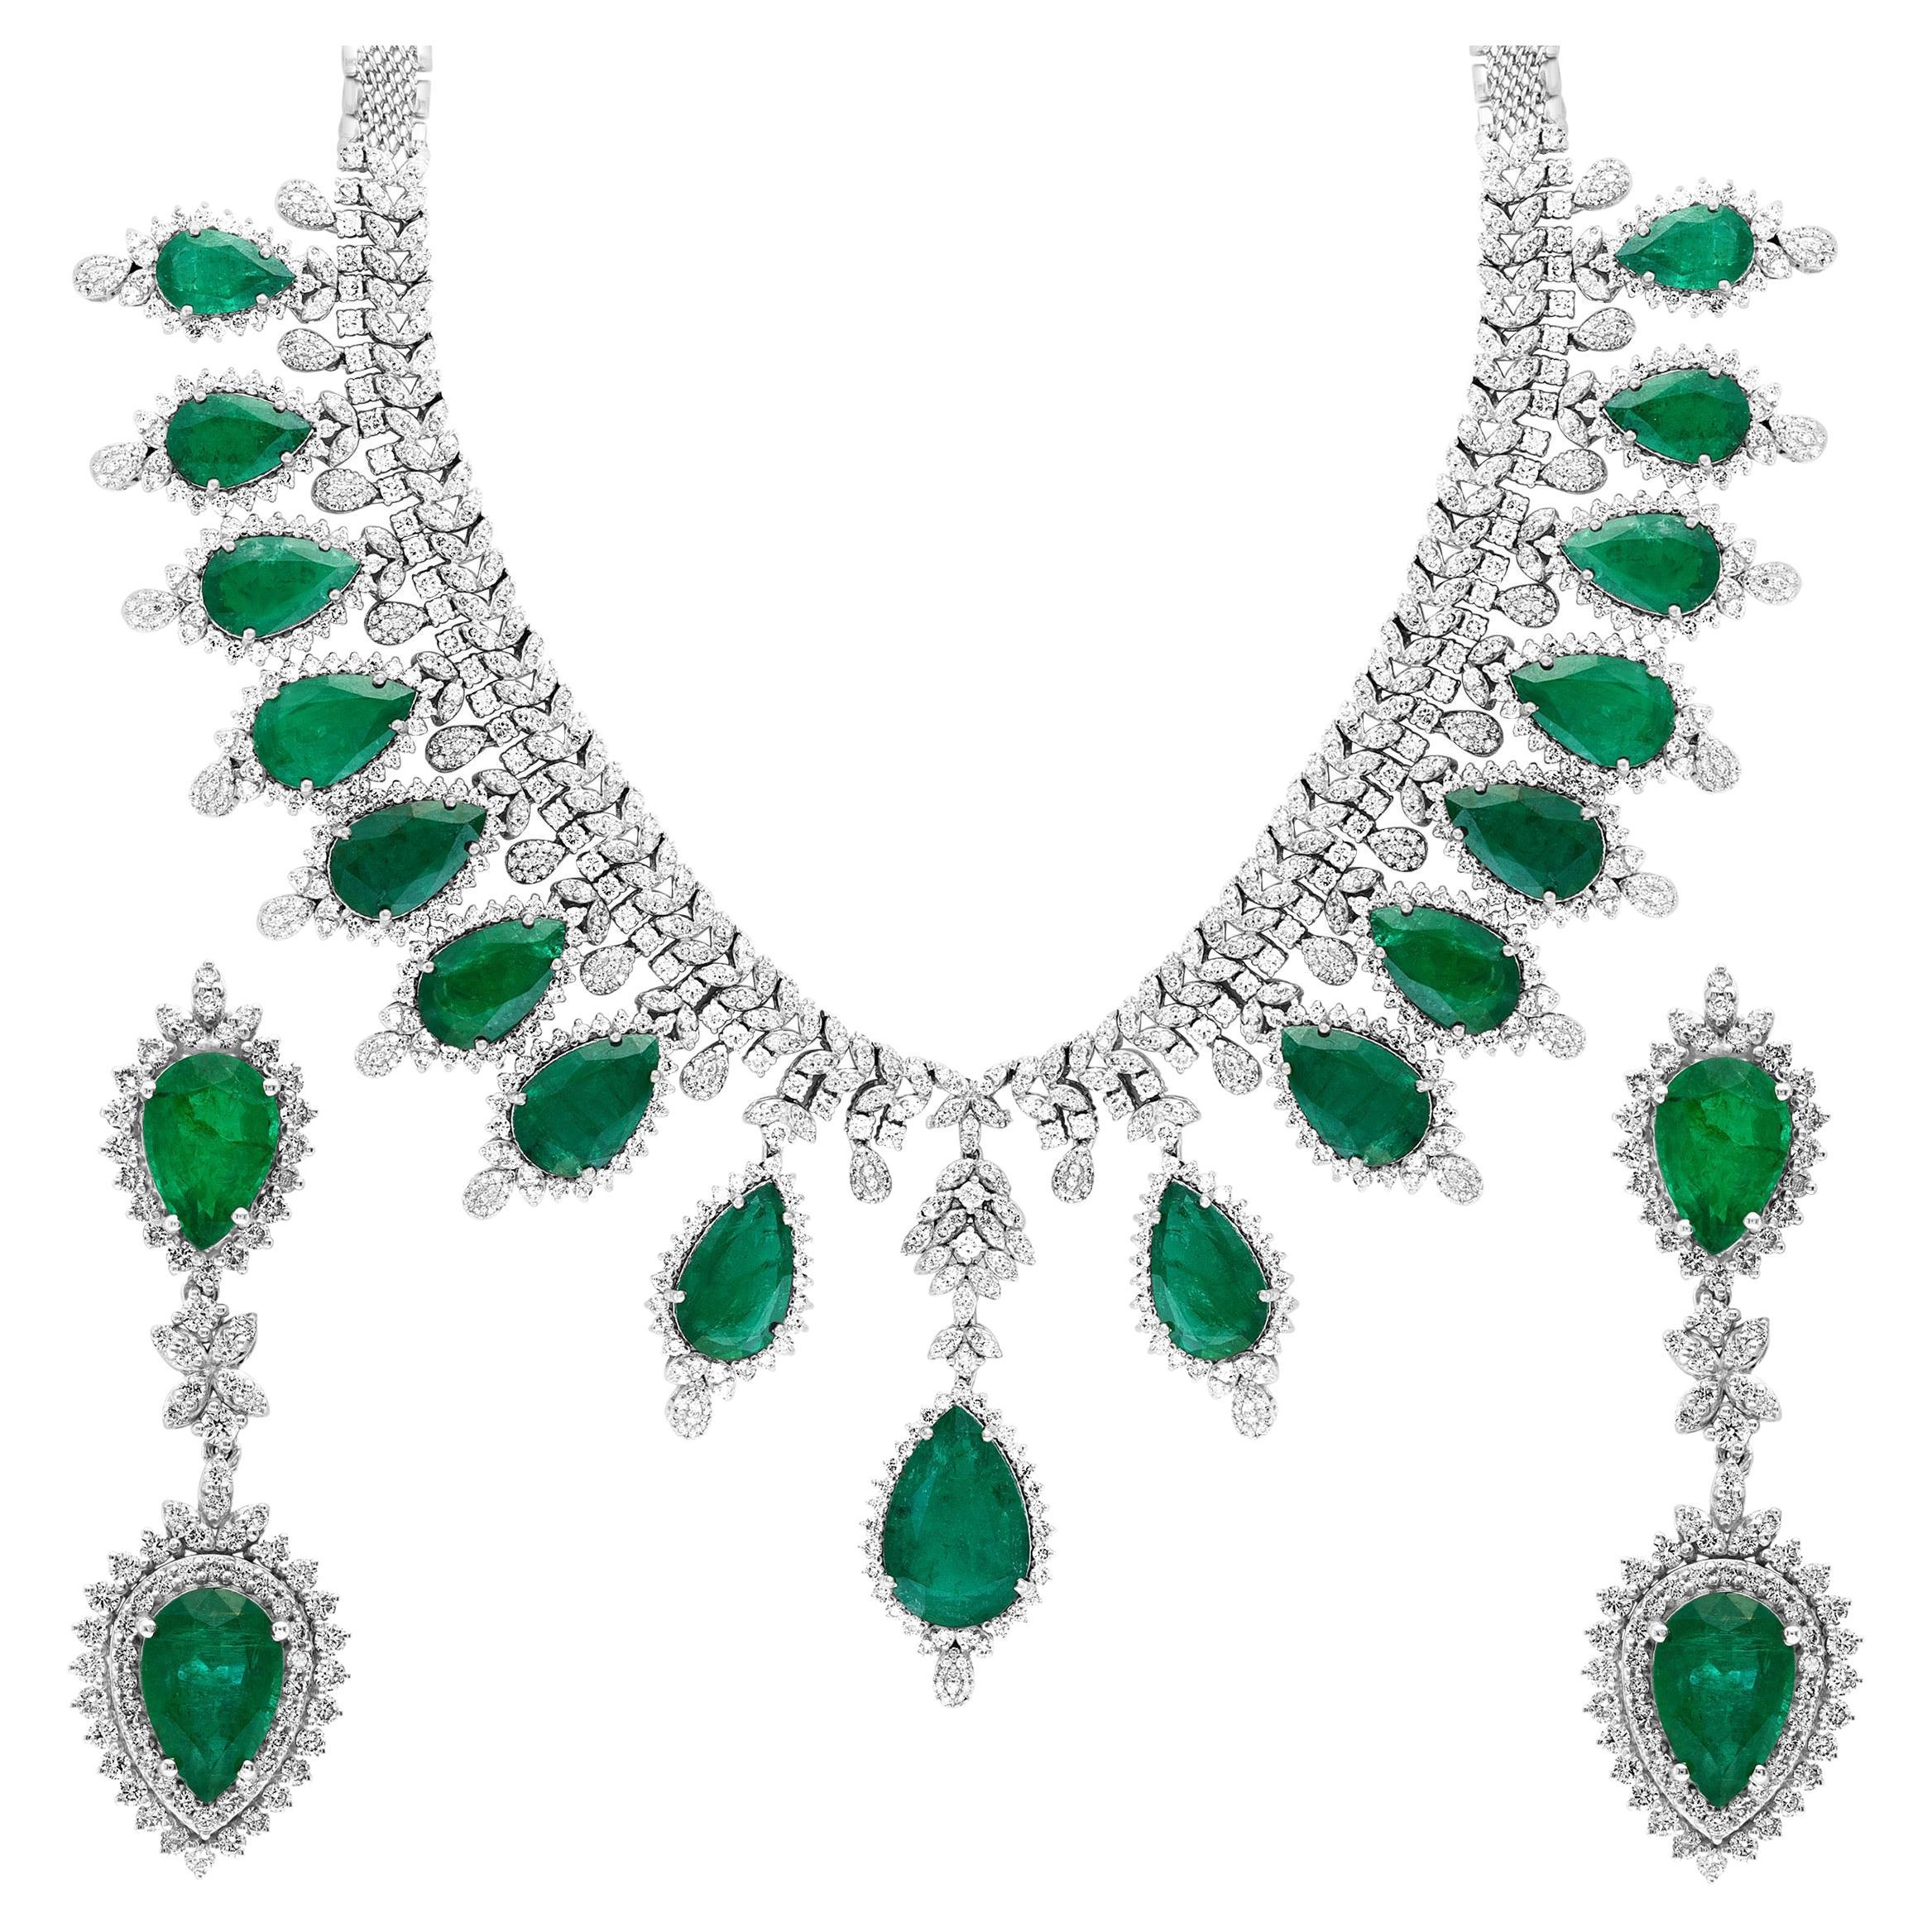 73ct Zambian Emerald and 22ct Diamond Necklace and Earring Bridal Suite For  Sale at 1stDibs | zambian emerald necklace, bridal emerald diamond necklace,  real emerald necklace and earring set